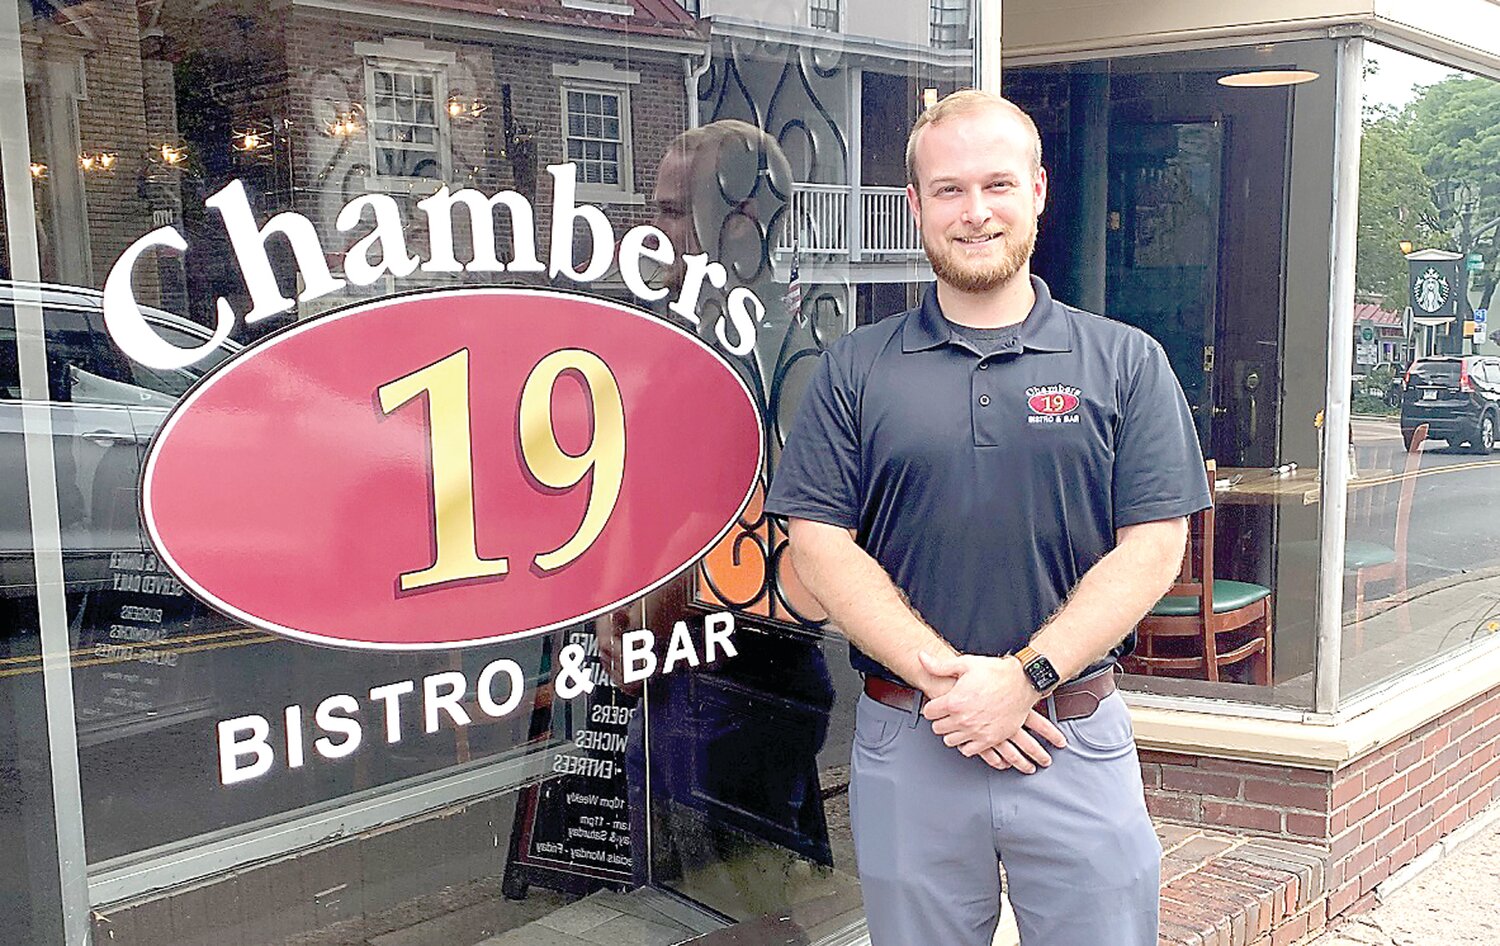 John Wolff bought the popular Doylestown restaurant and bar and its companion, The Other Side, in February. He just turned 27.